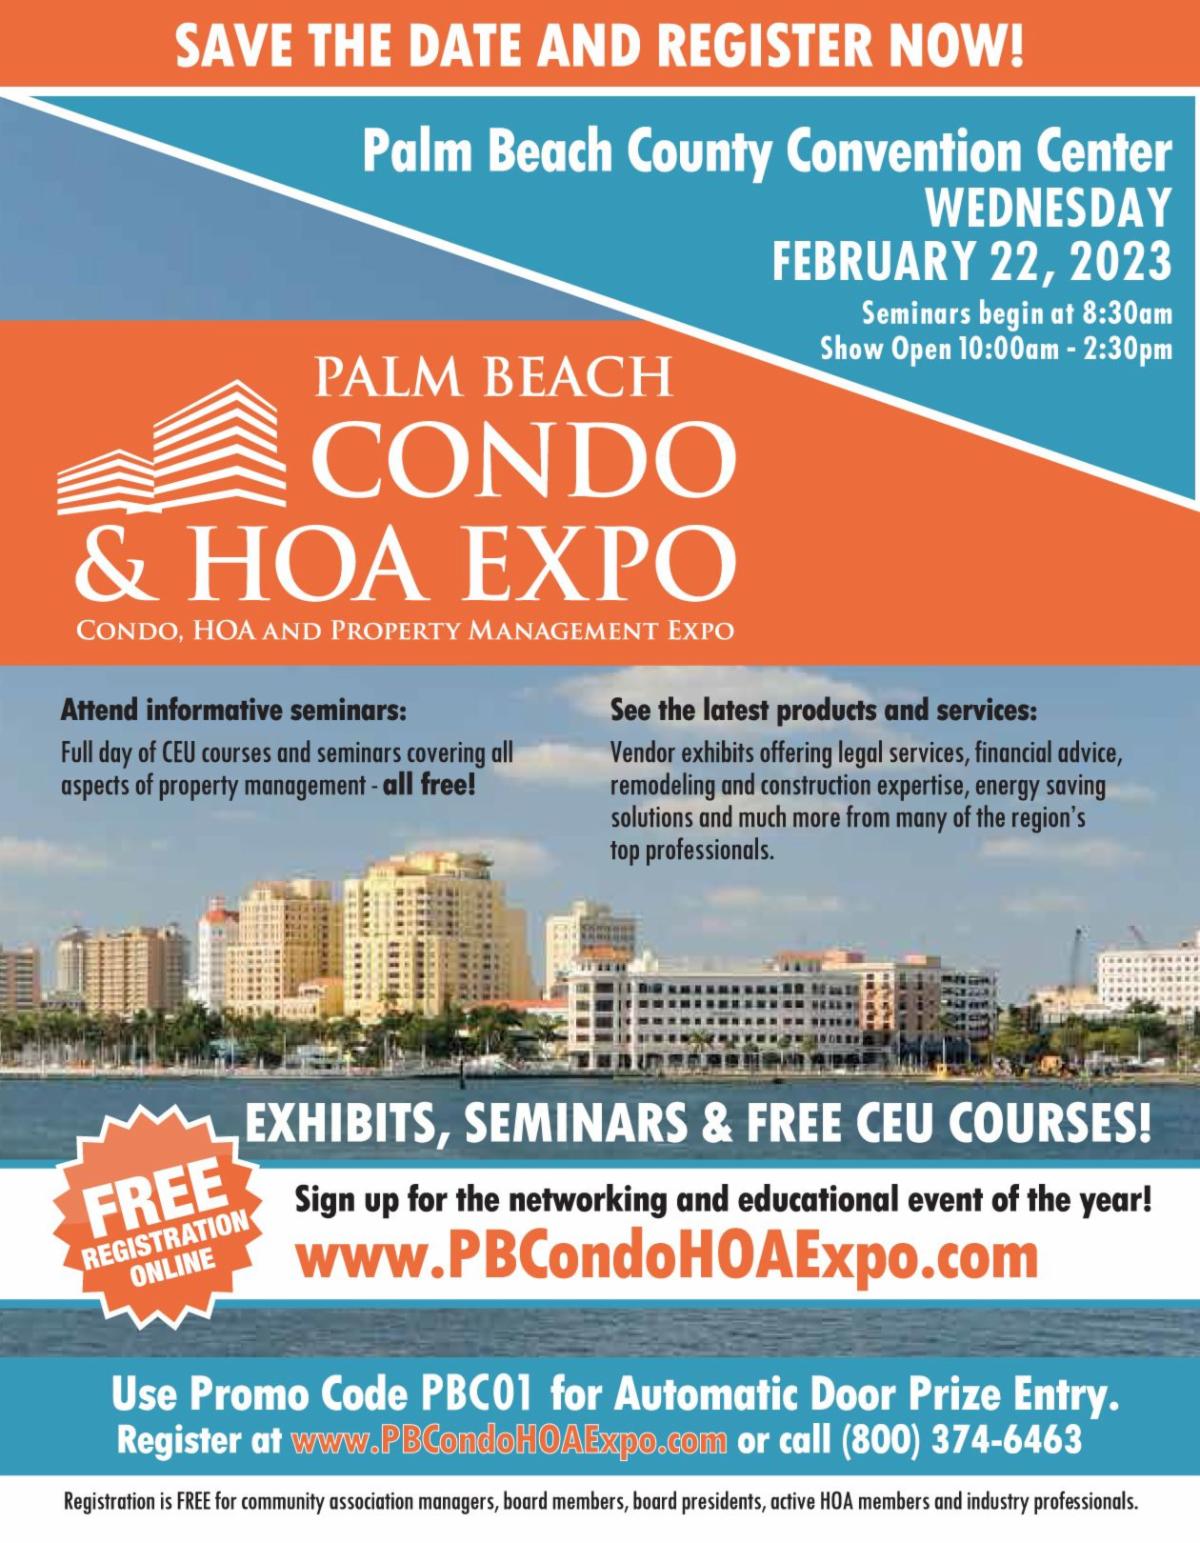 Join SFPMA Members and others on Wednesday, February 22, for the Palm Beach Condo & HOA Expo.